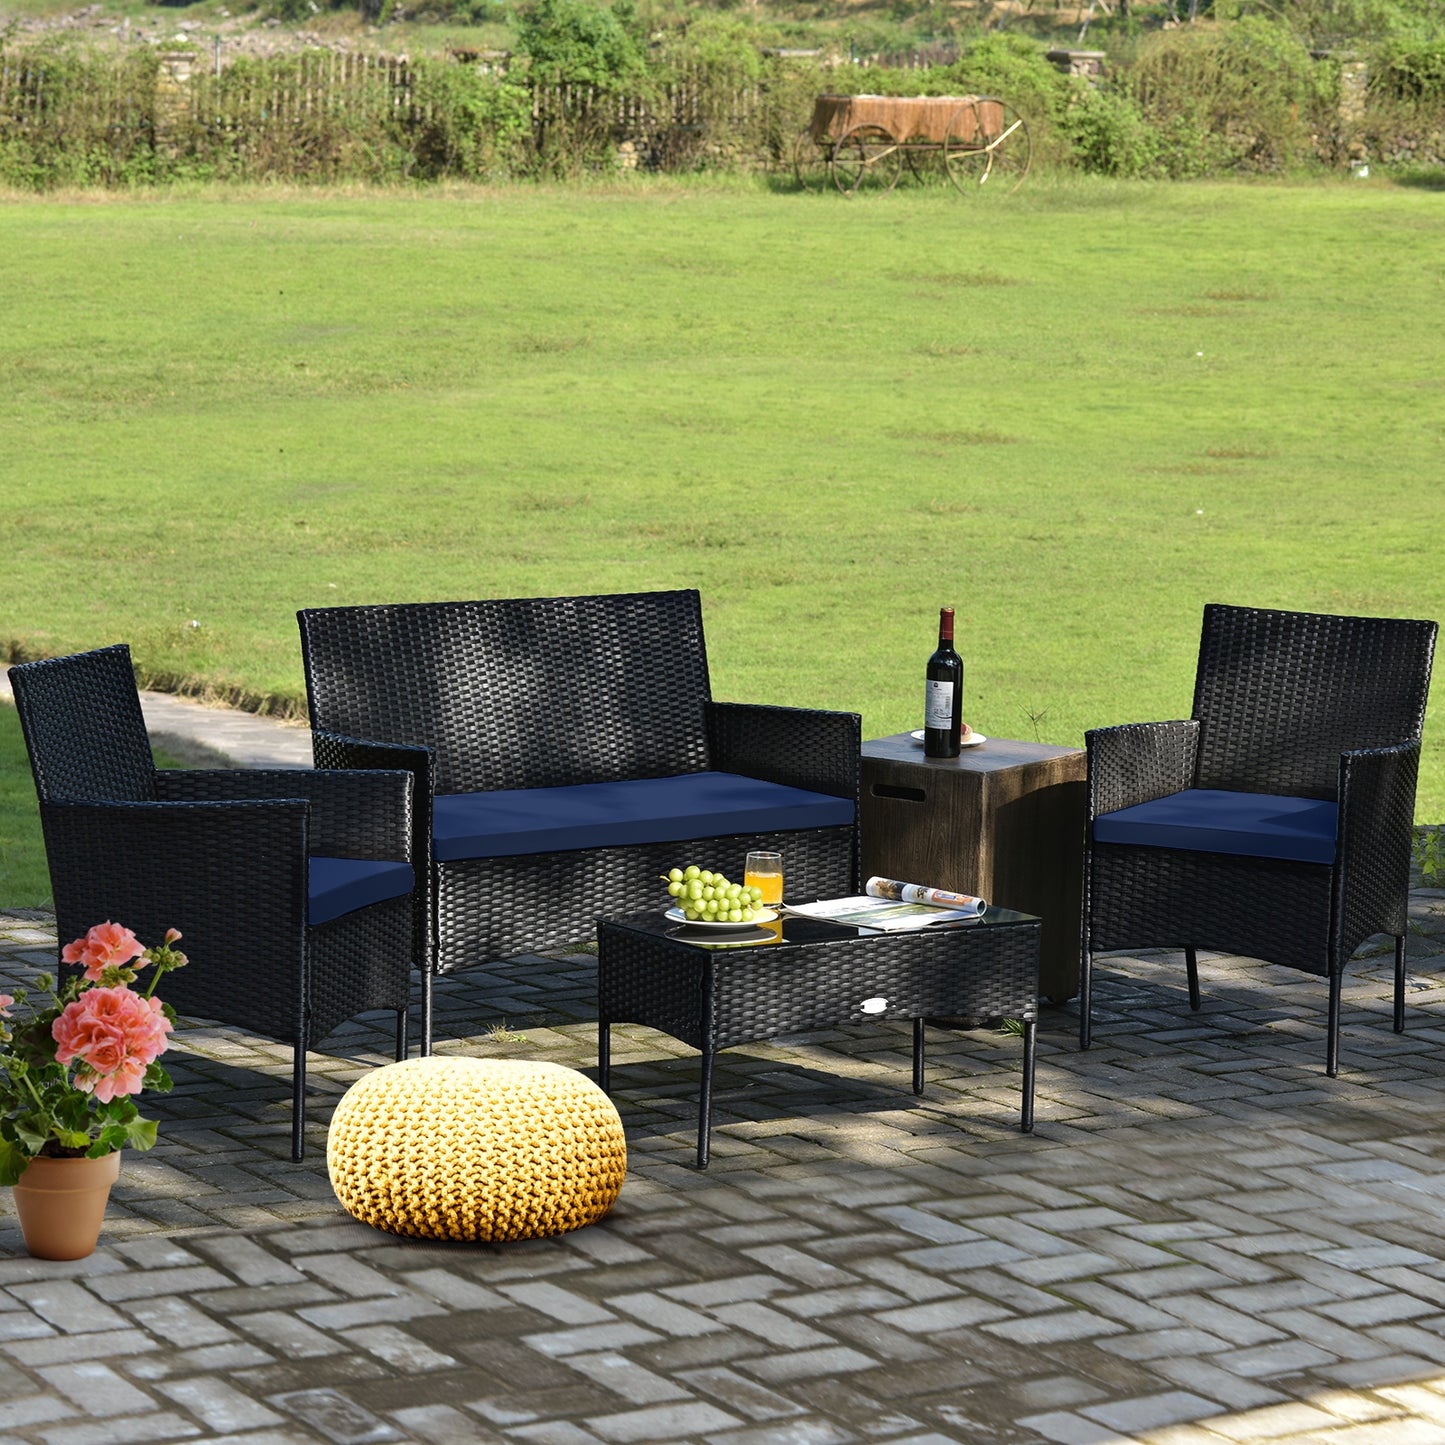 4 Pieces Patio Rattan Cushioned Sofa Set with Tempered Glass Coffee Table-Navy